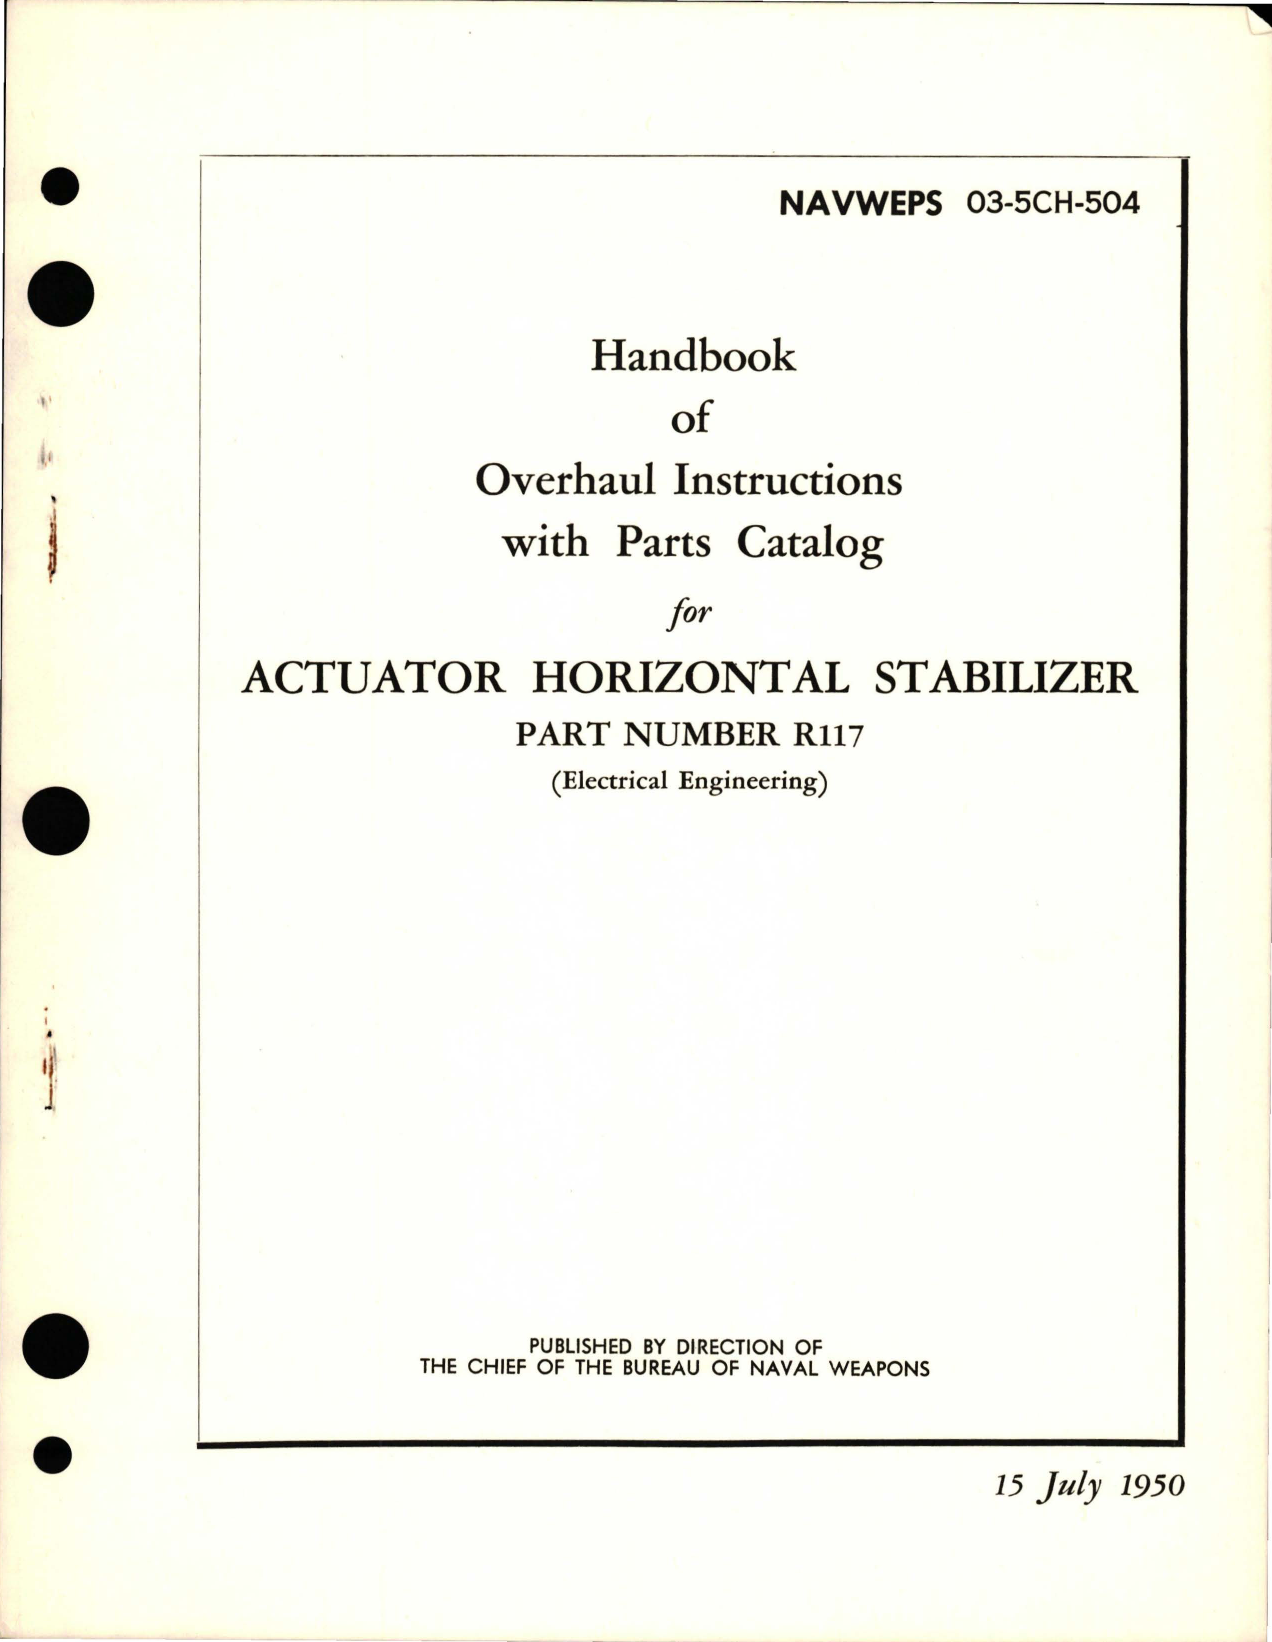 Sample page 1 from AirCorps Library document: Overhaul Instructions with Parts Catalog for Actuator Horizontal Stabilizer - Part R117